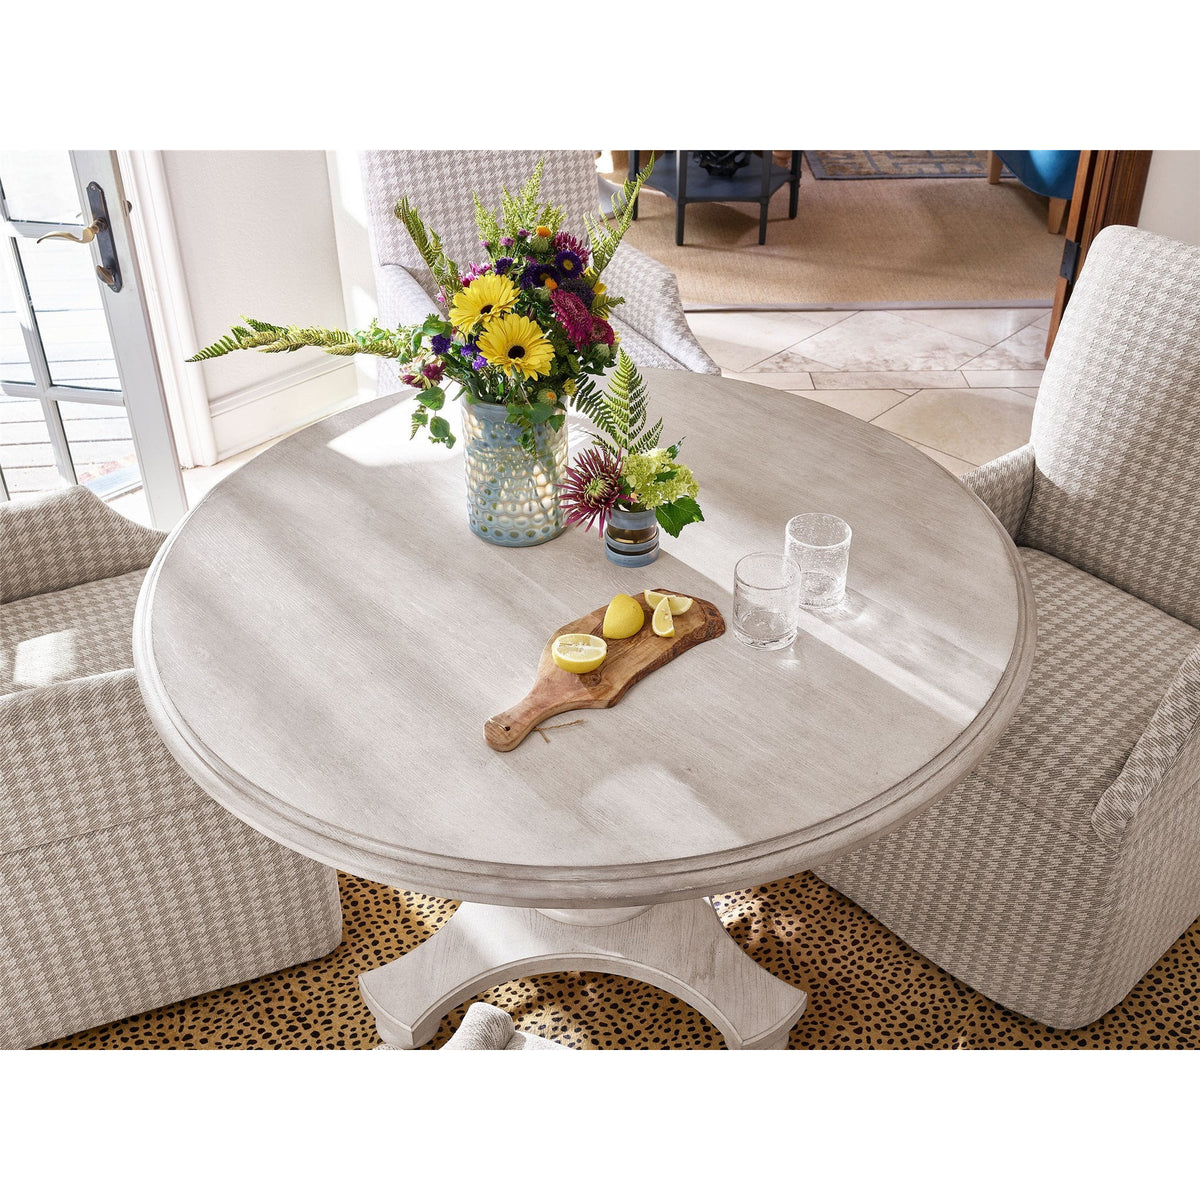 Ansen Round Dining Table - Be Bold Furniture